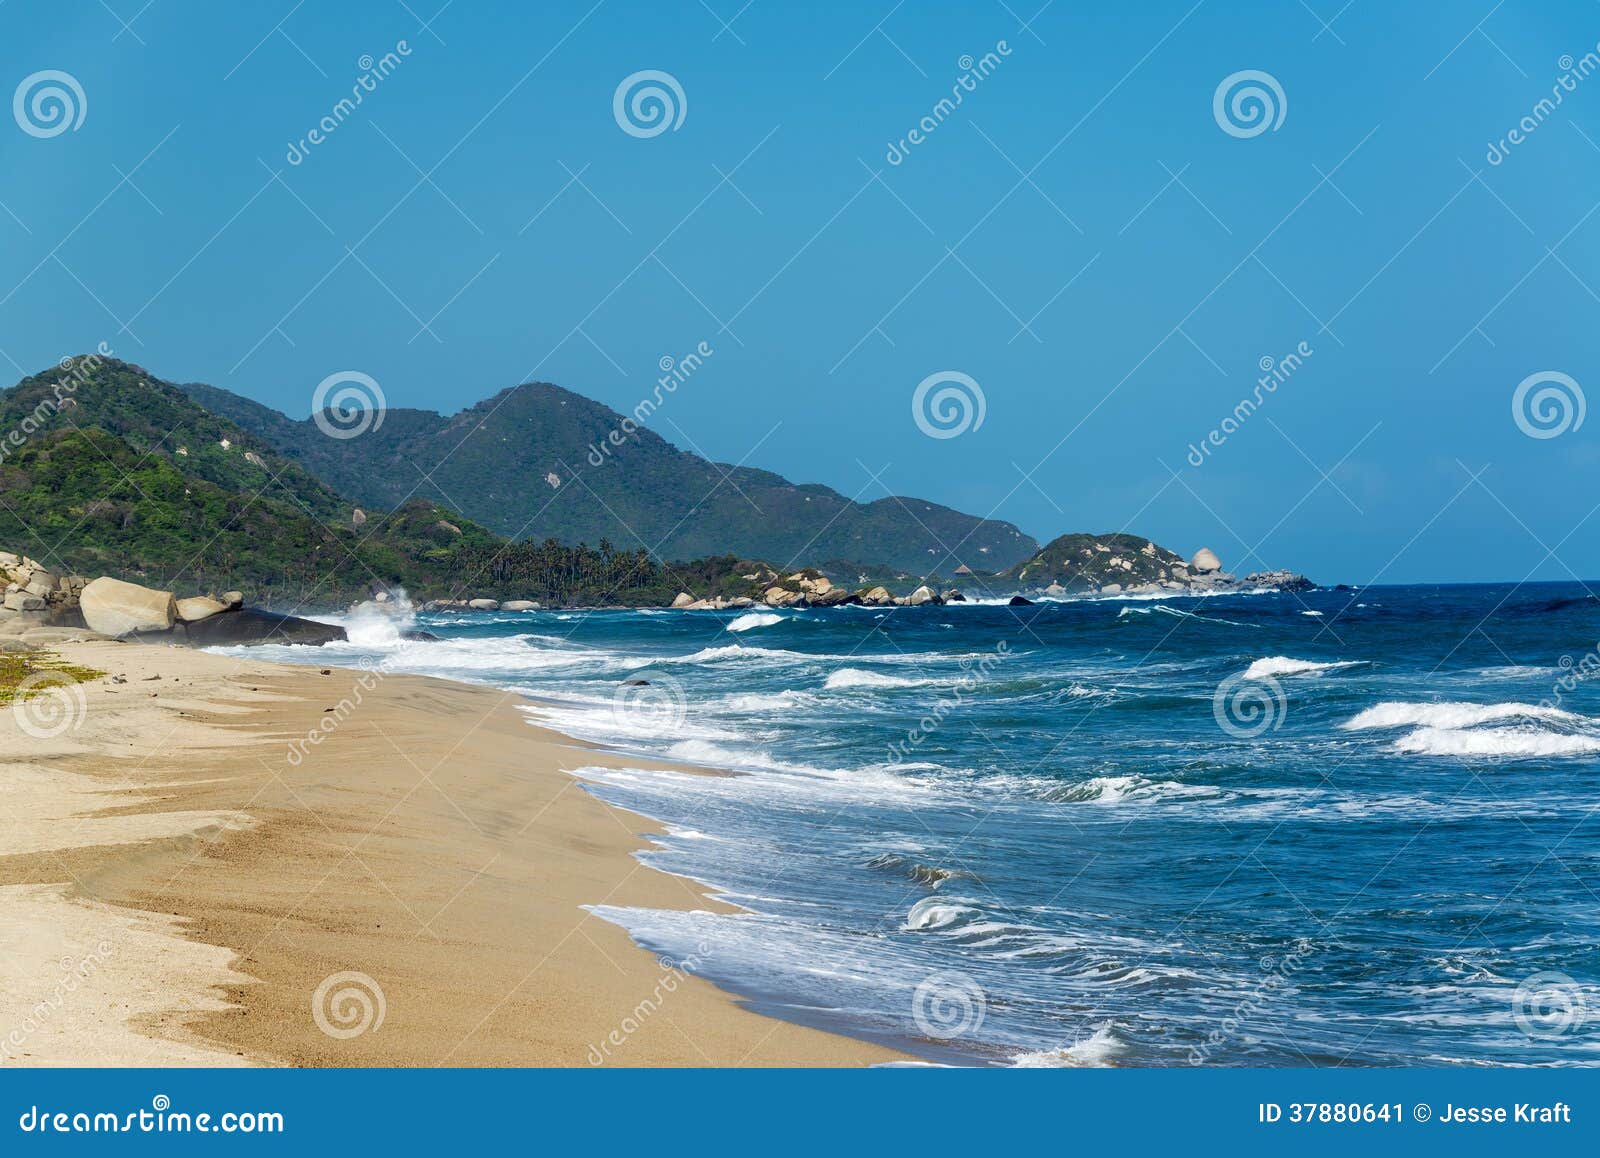 beach and blue waves